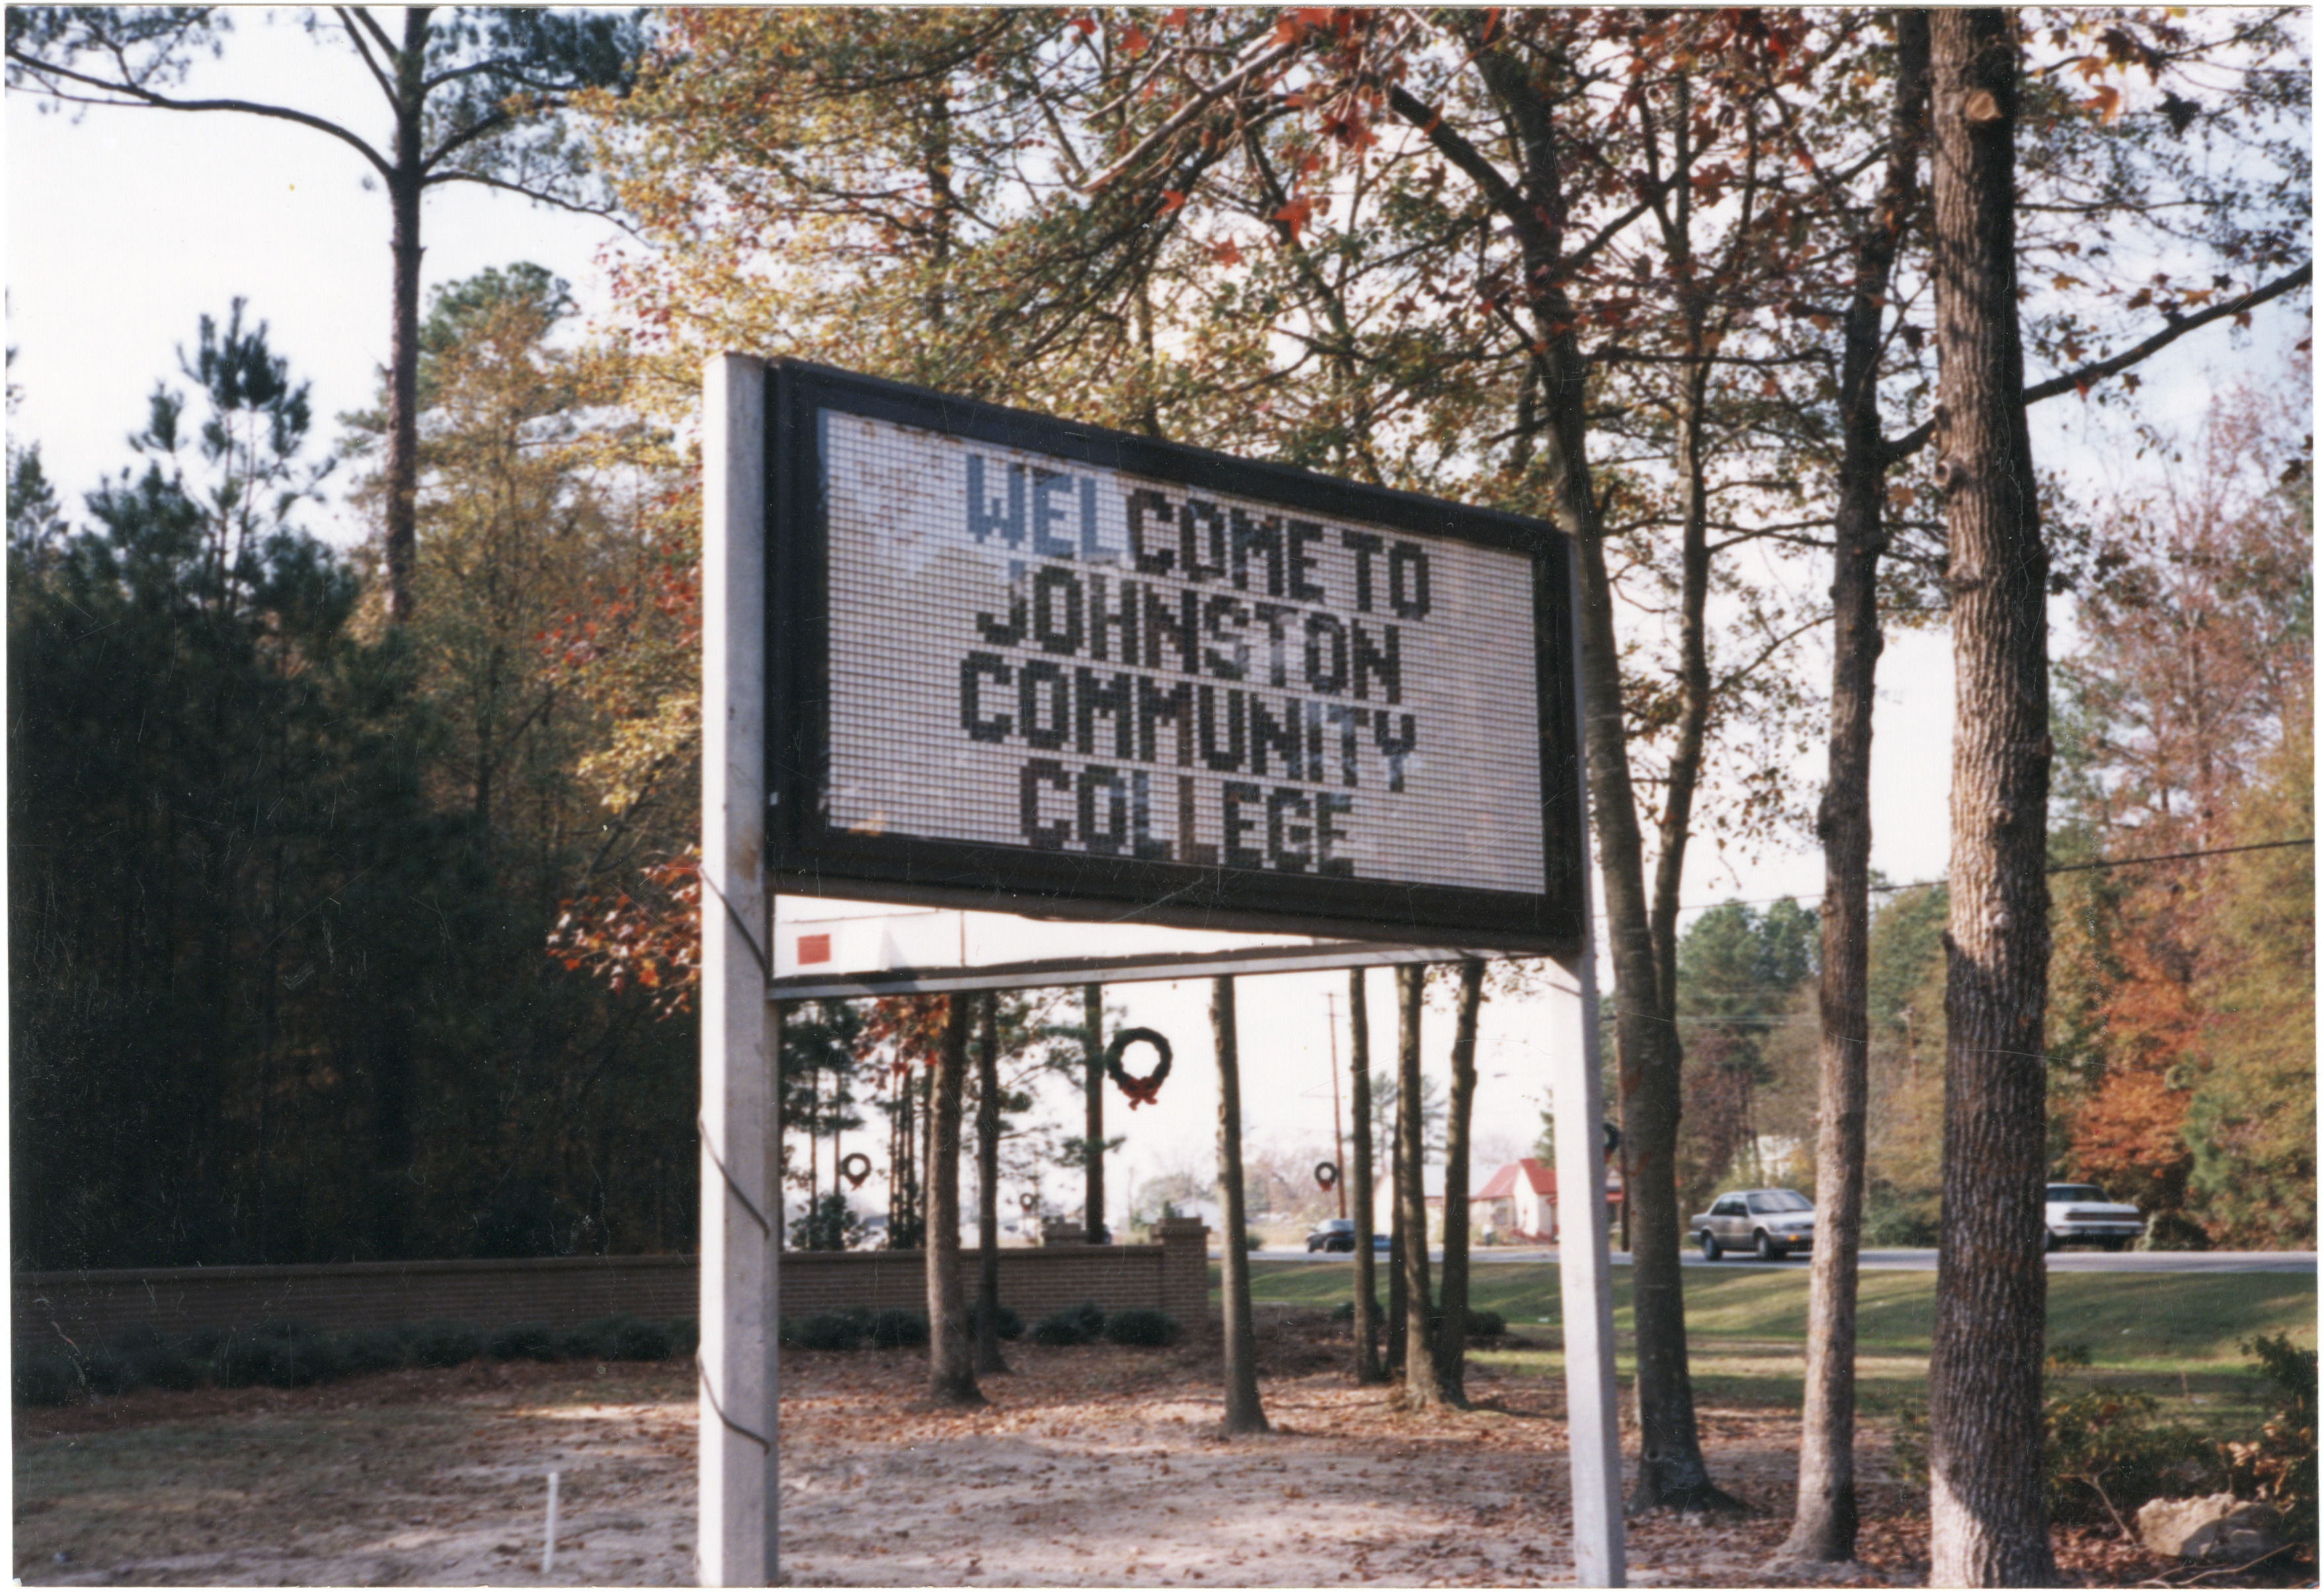 Electronic welcome sign, Johnston Community College, 1985